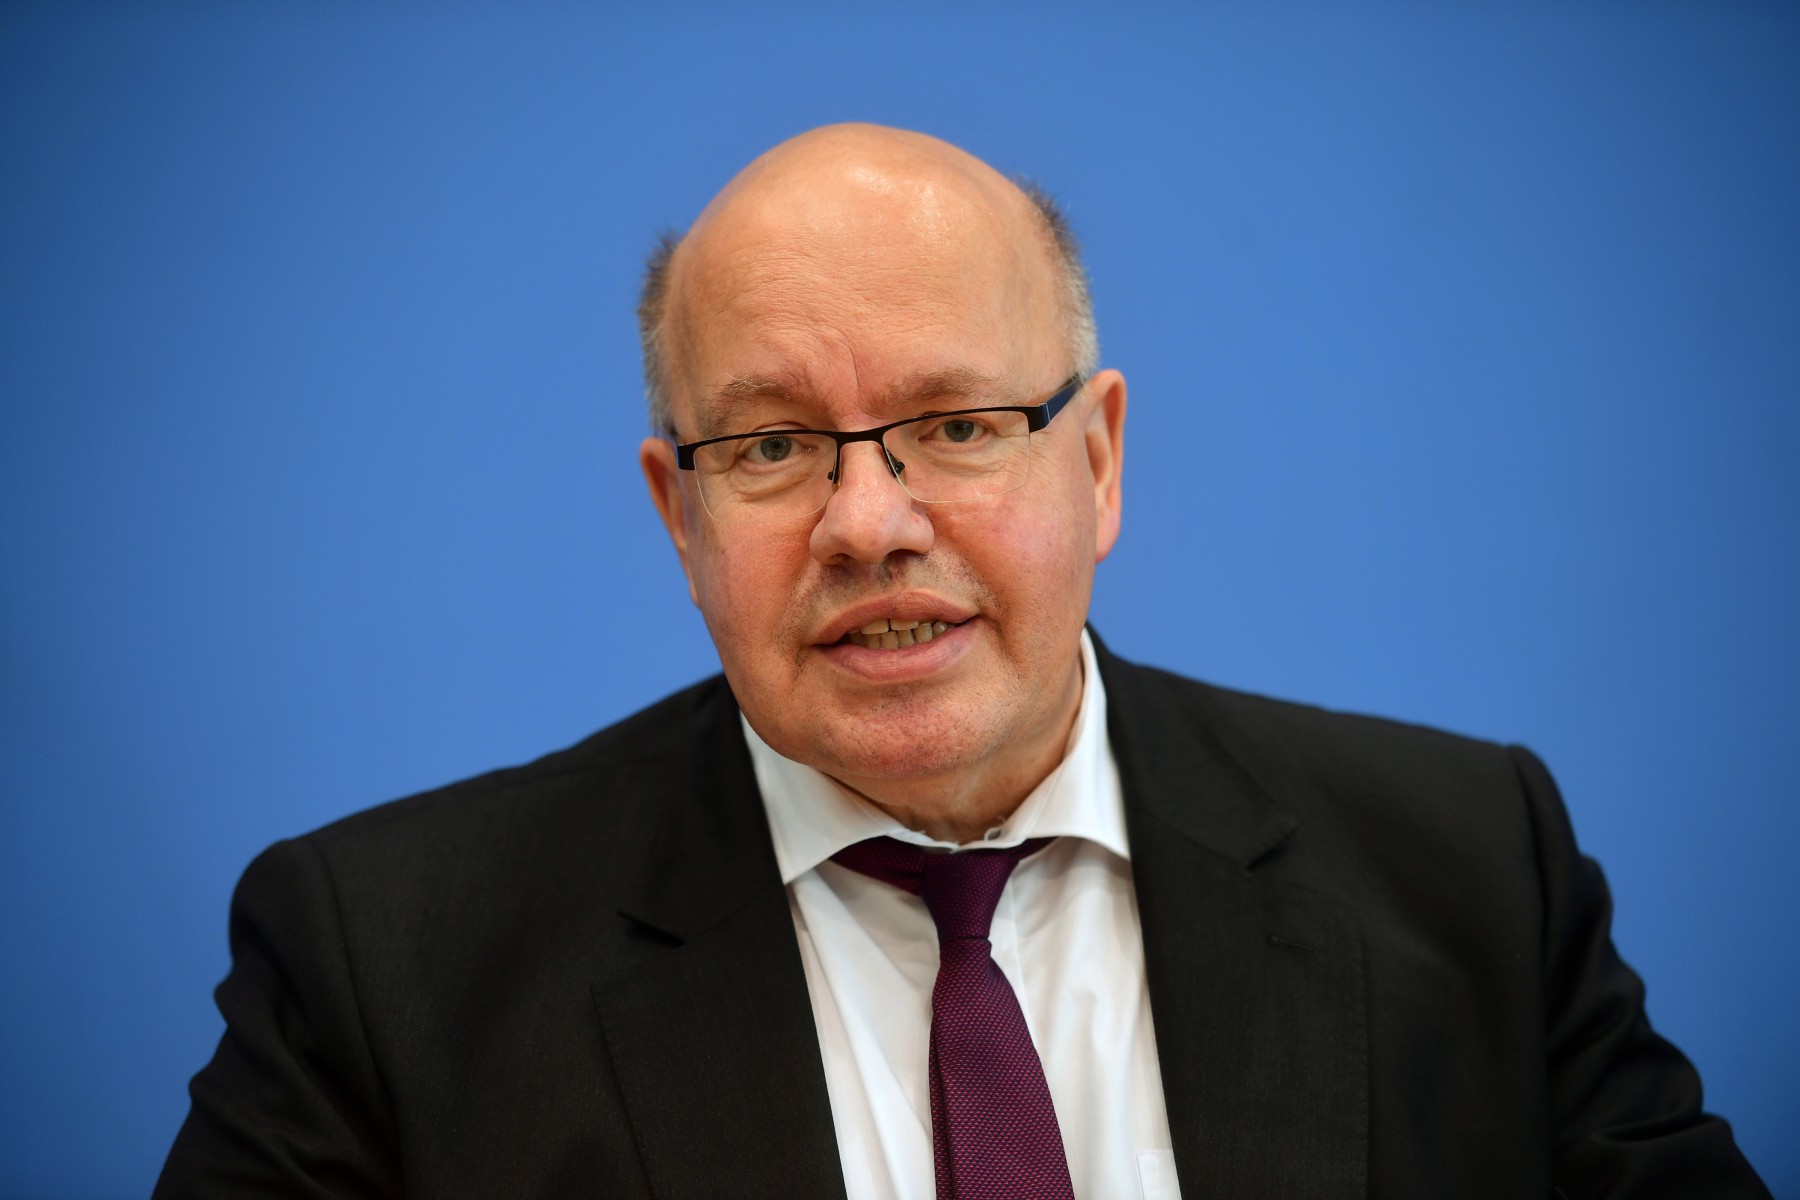 Germanys economy minister Peter Altmaier argued that if the UK needed a longer delay to hold a General Election or Second Referendum then leaders should accommodate it